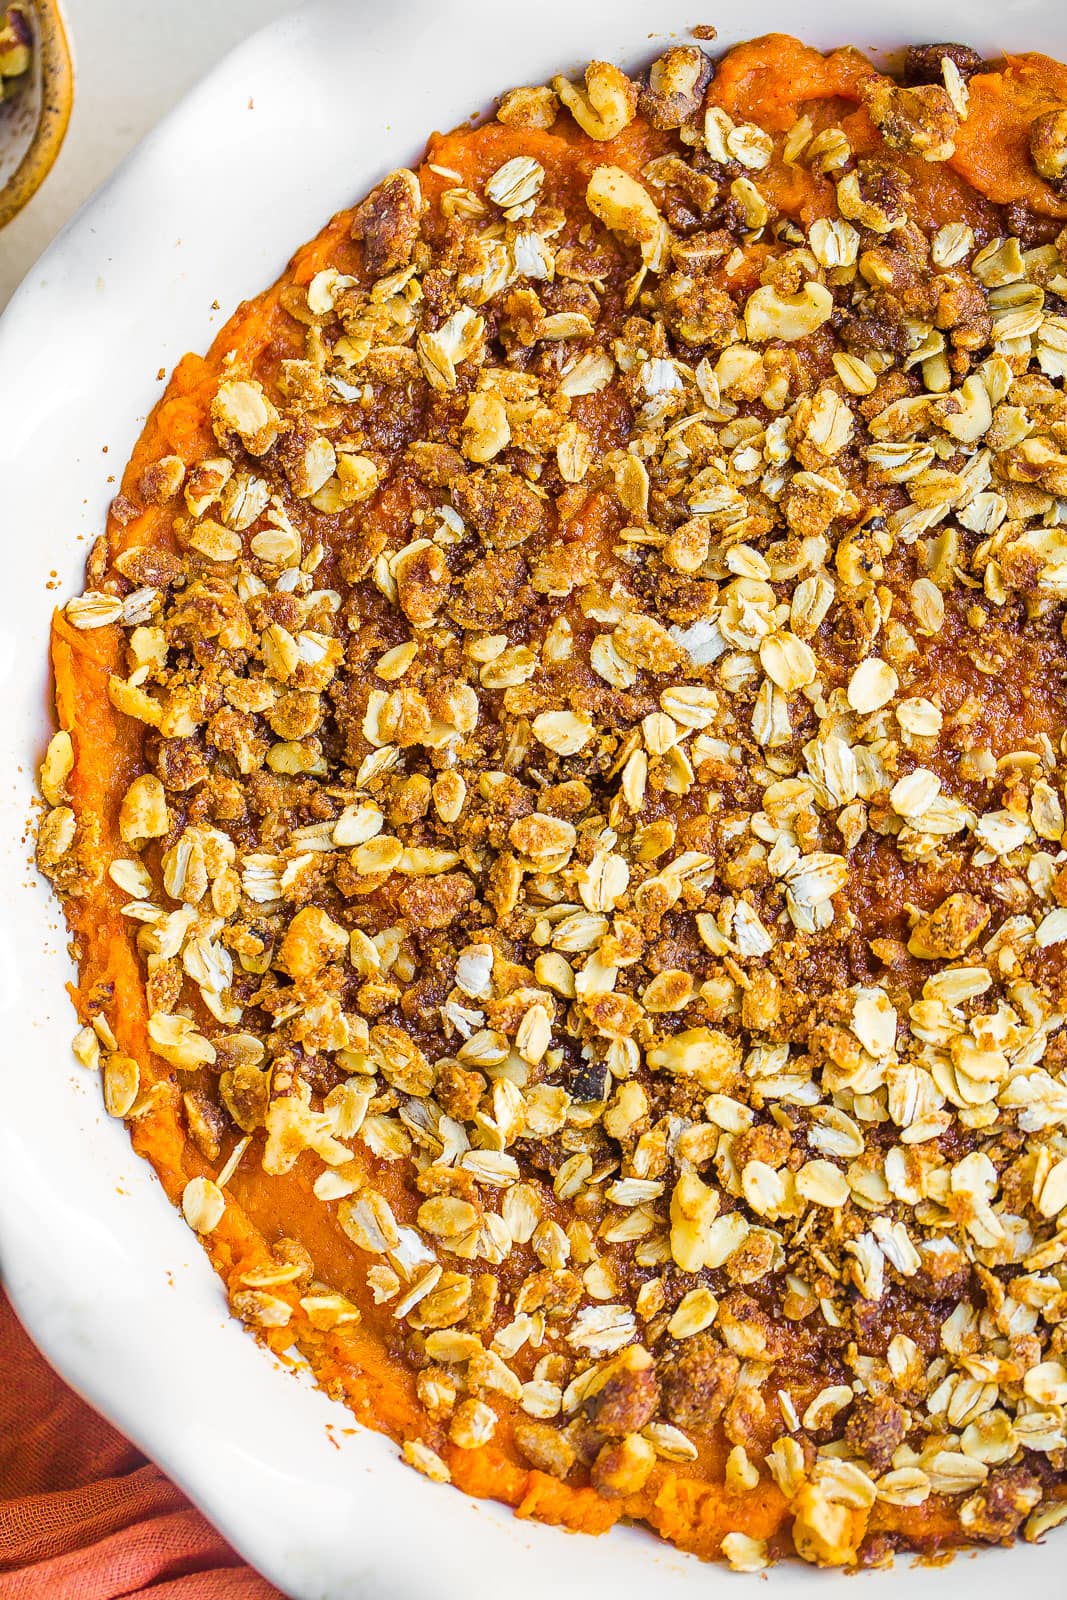 Close up view of sweet potato casserole recipe with pecan oat crumble topping.